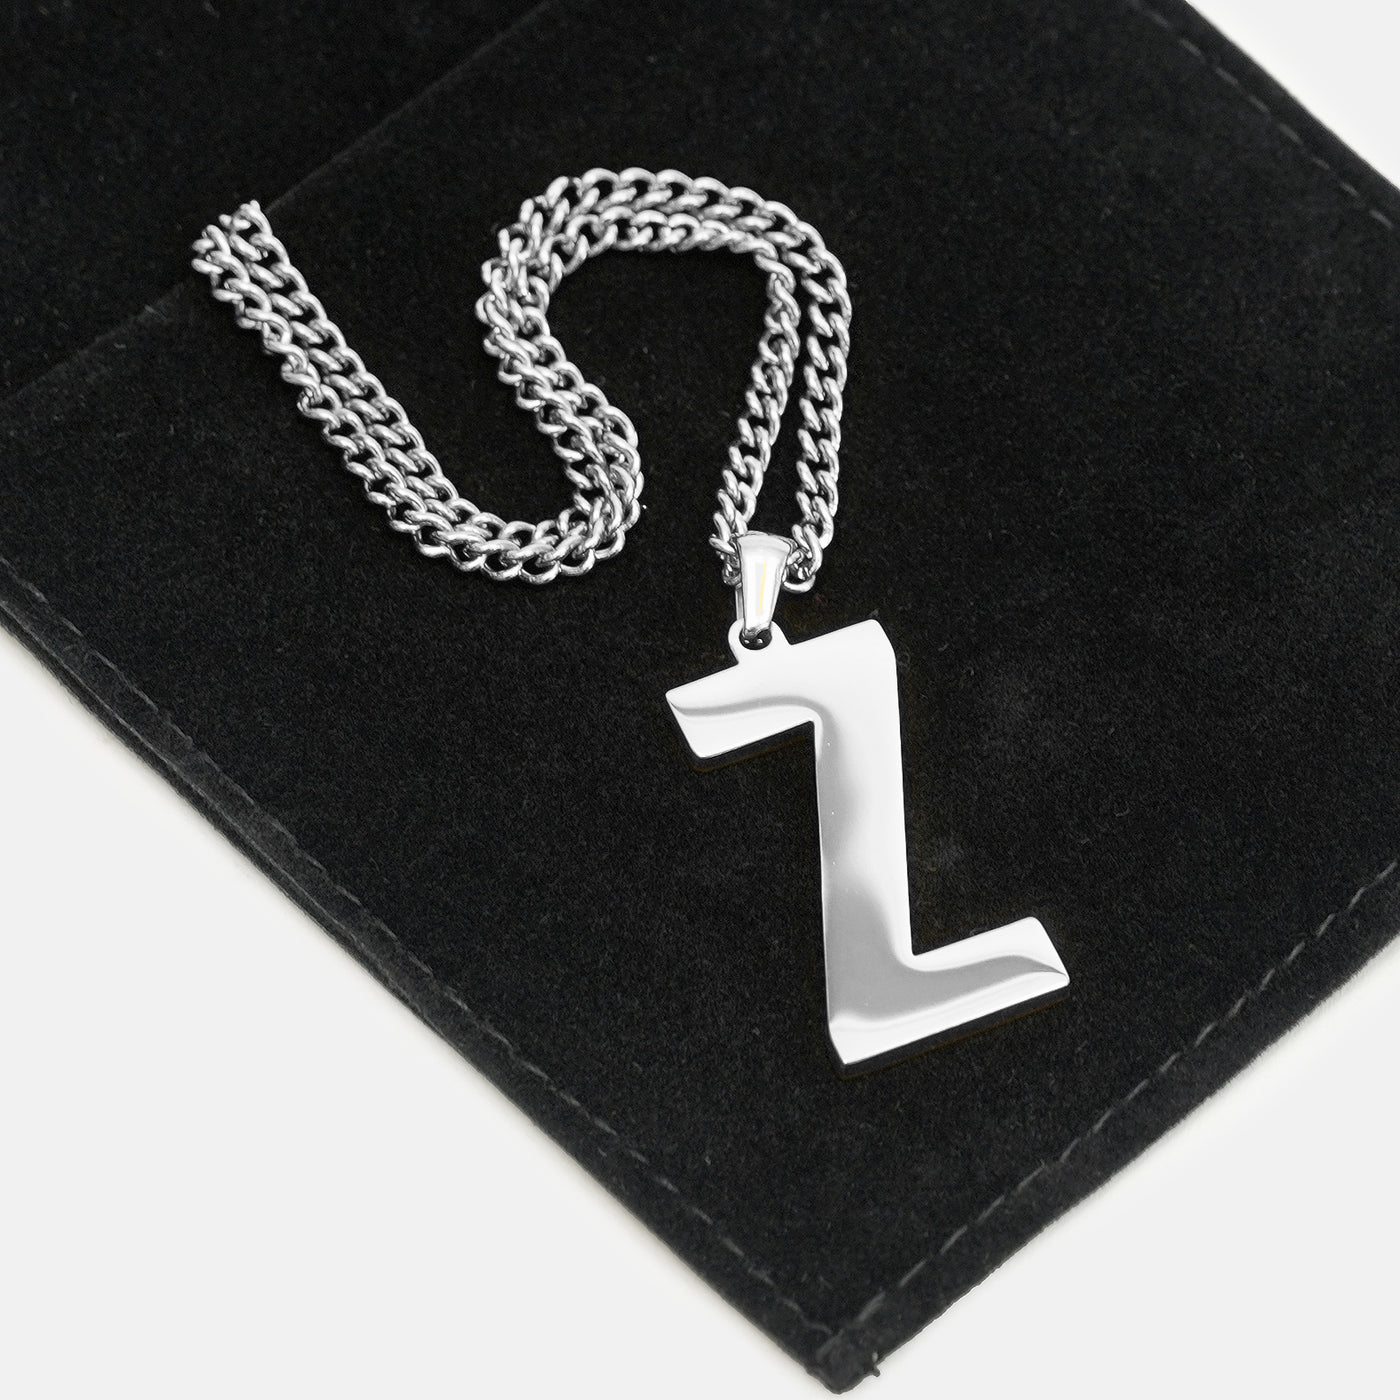 Z Letter Pendant with Chain Necklace - Stainless Steel